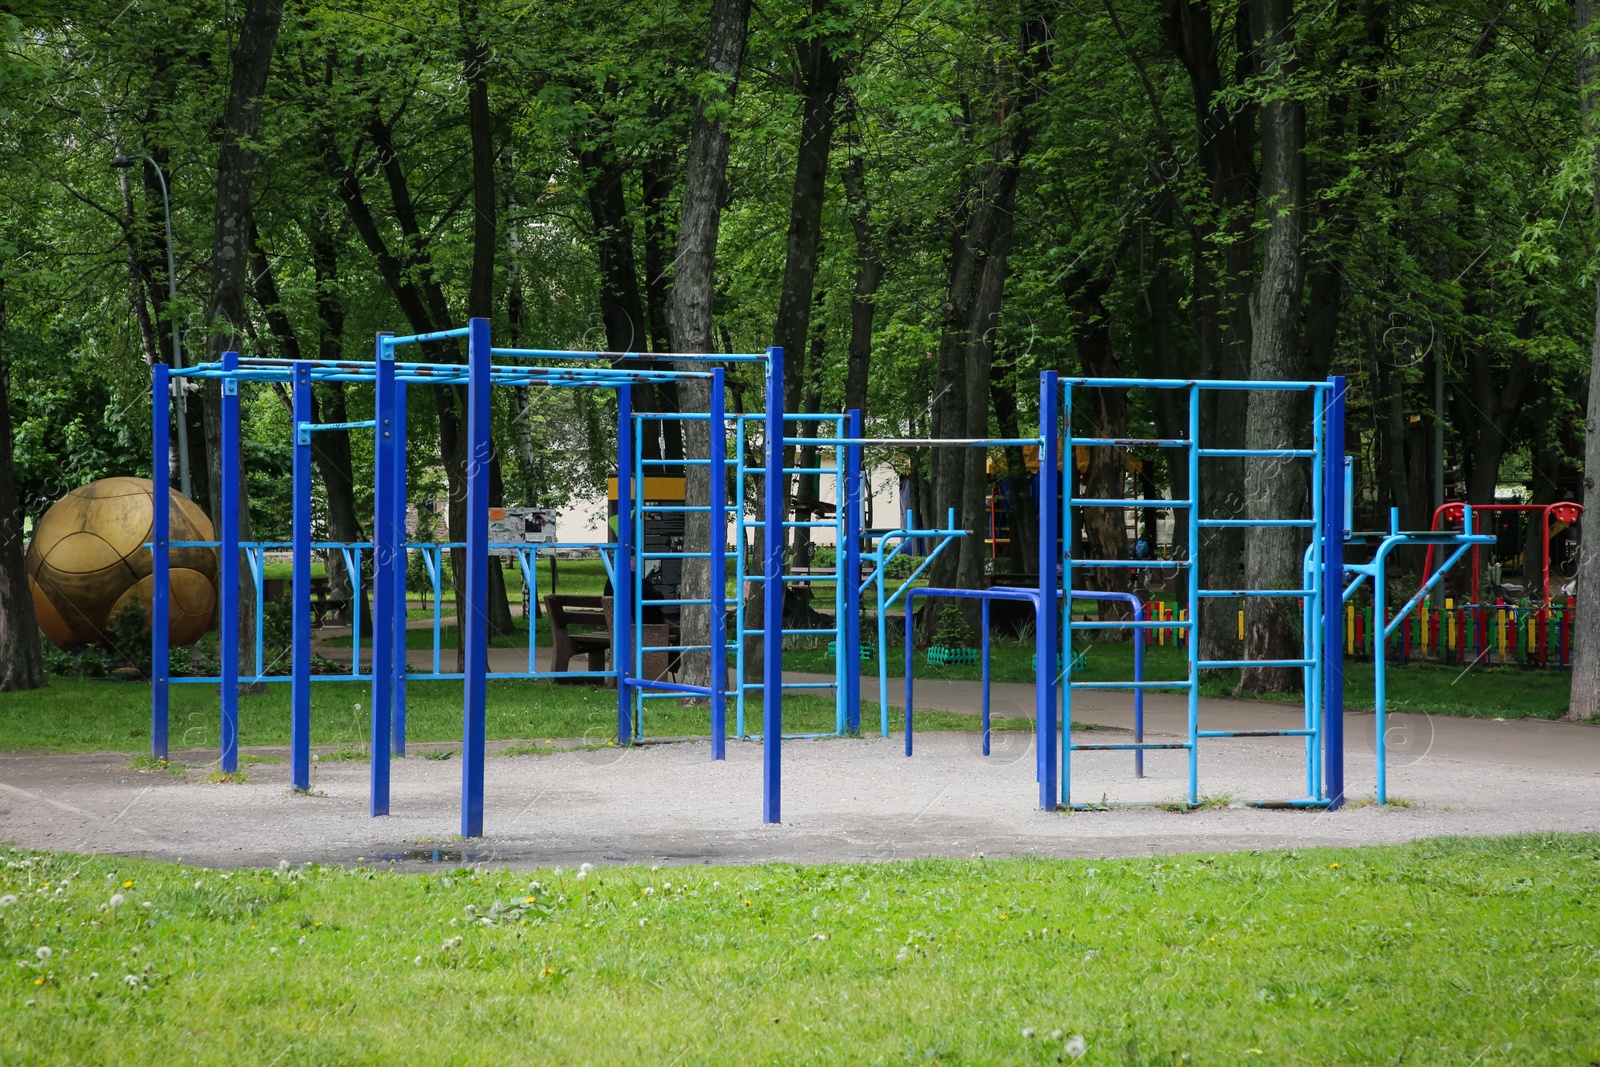 Photo of Empty monkey bars on outdoor gym in park